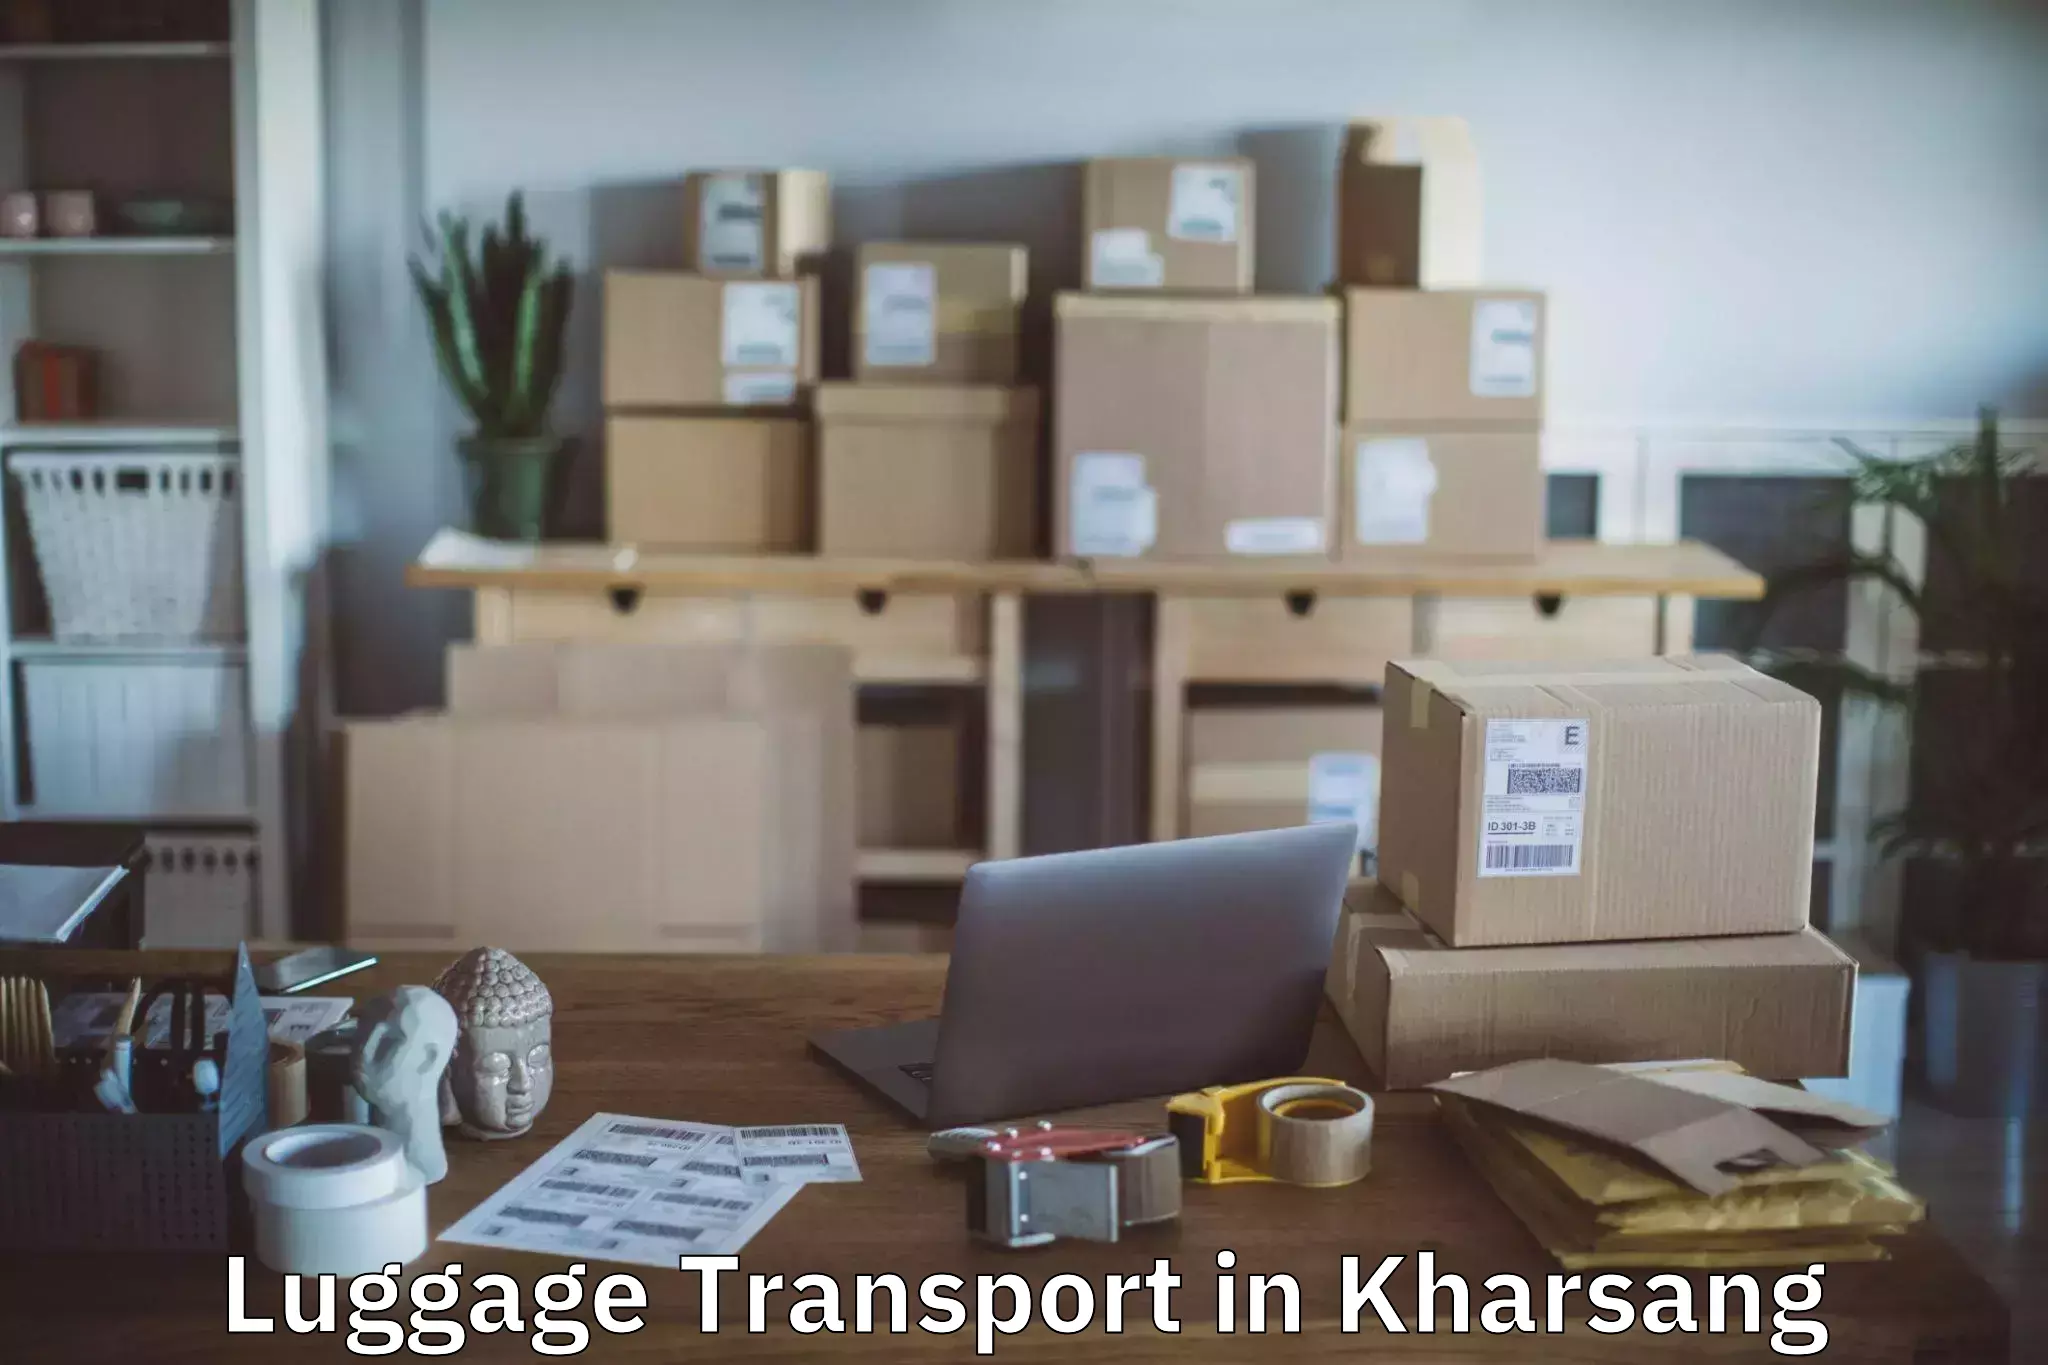 Baggage transport services in Kharsang